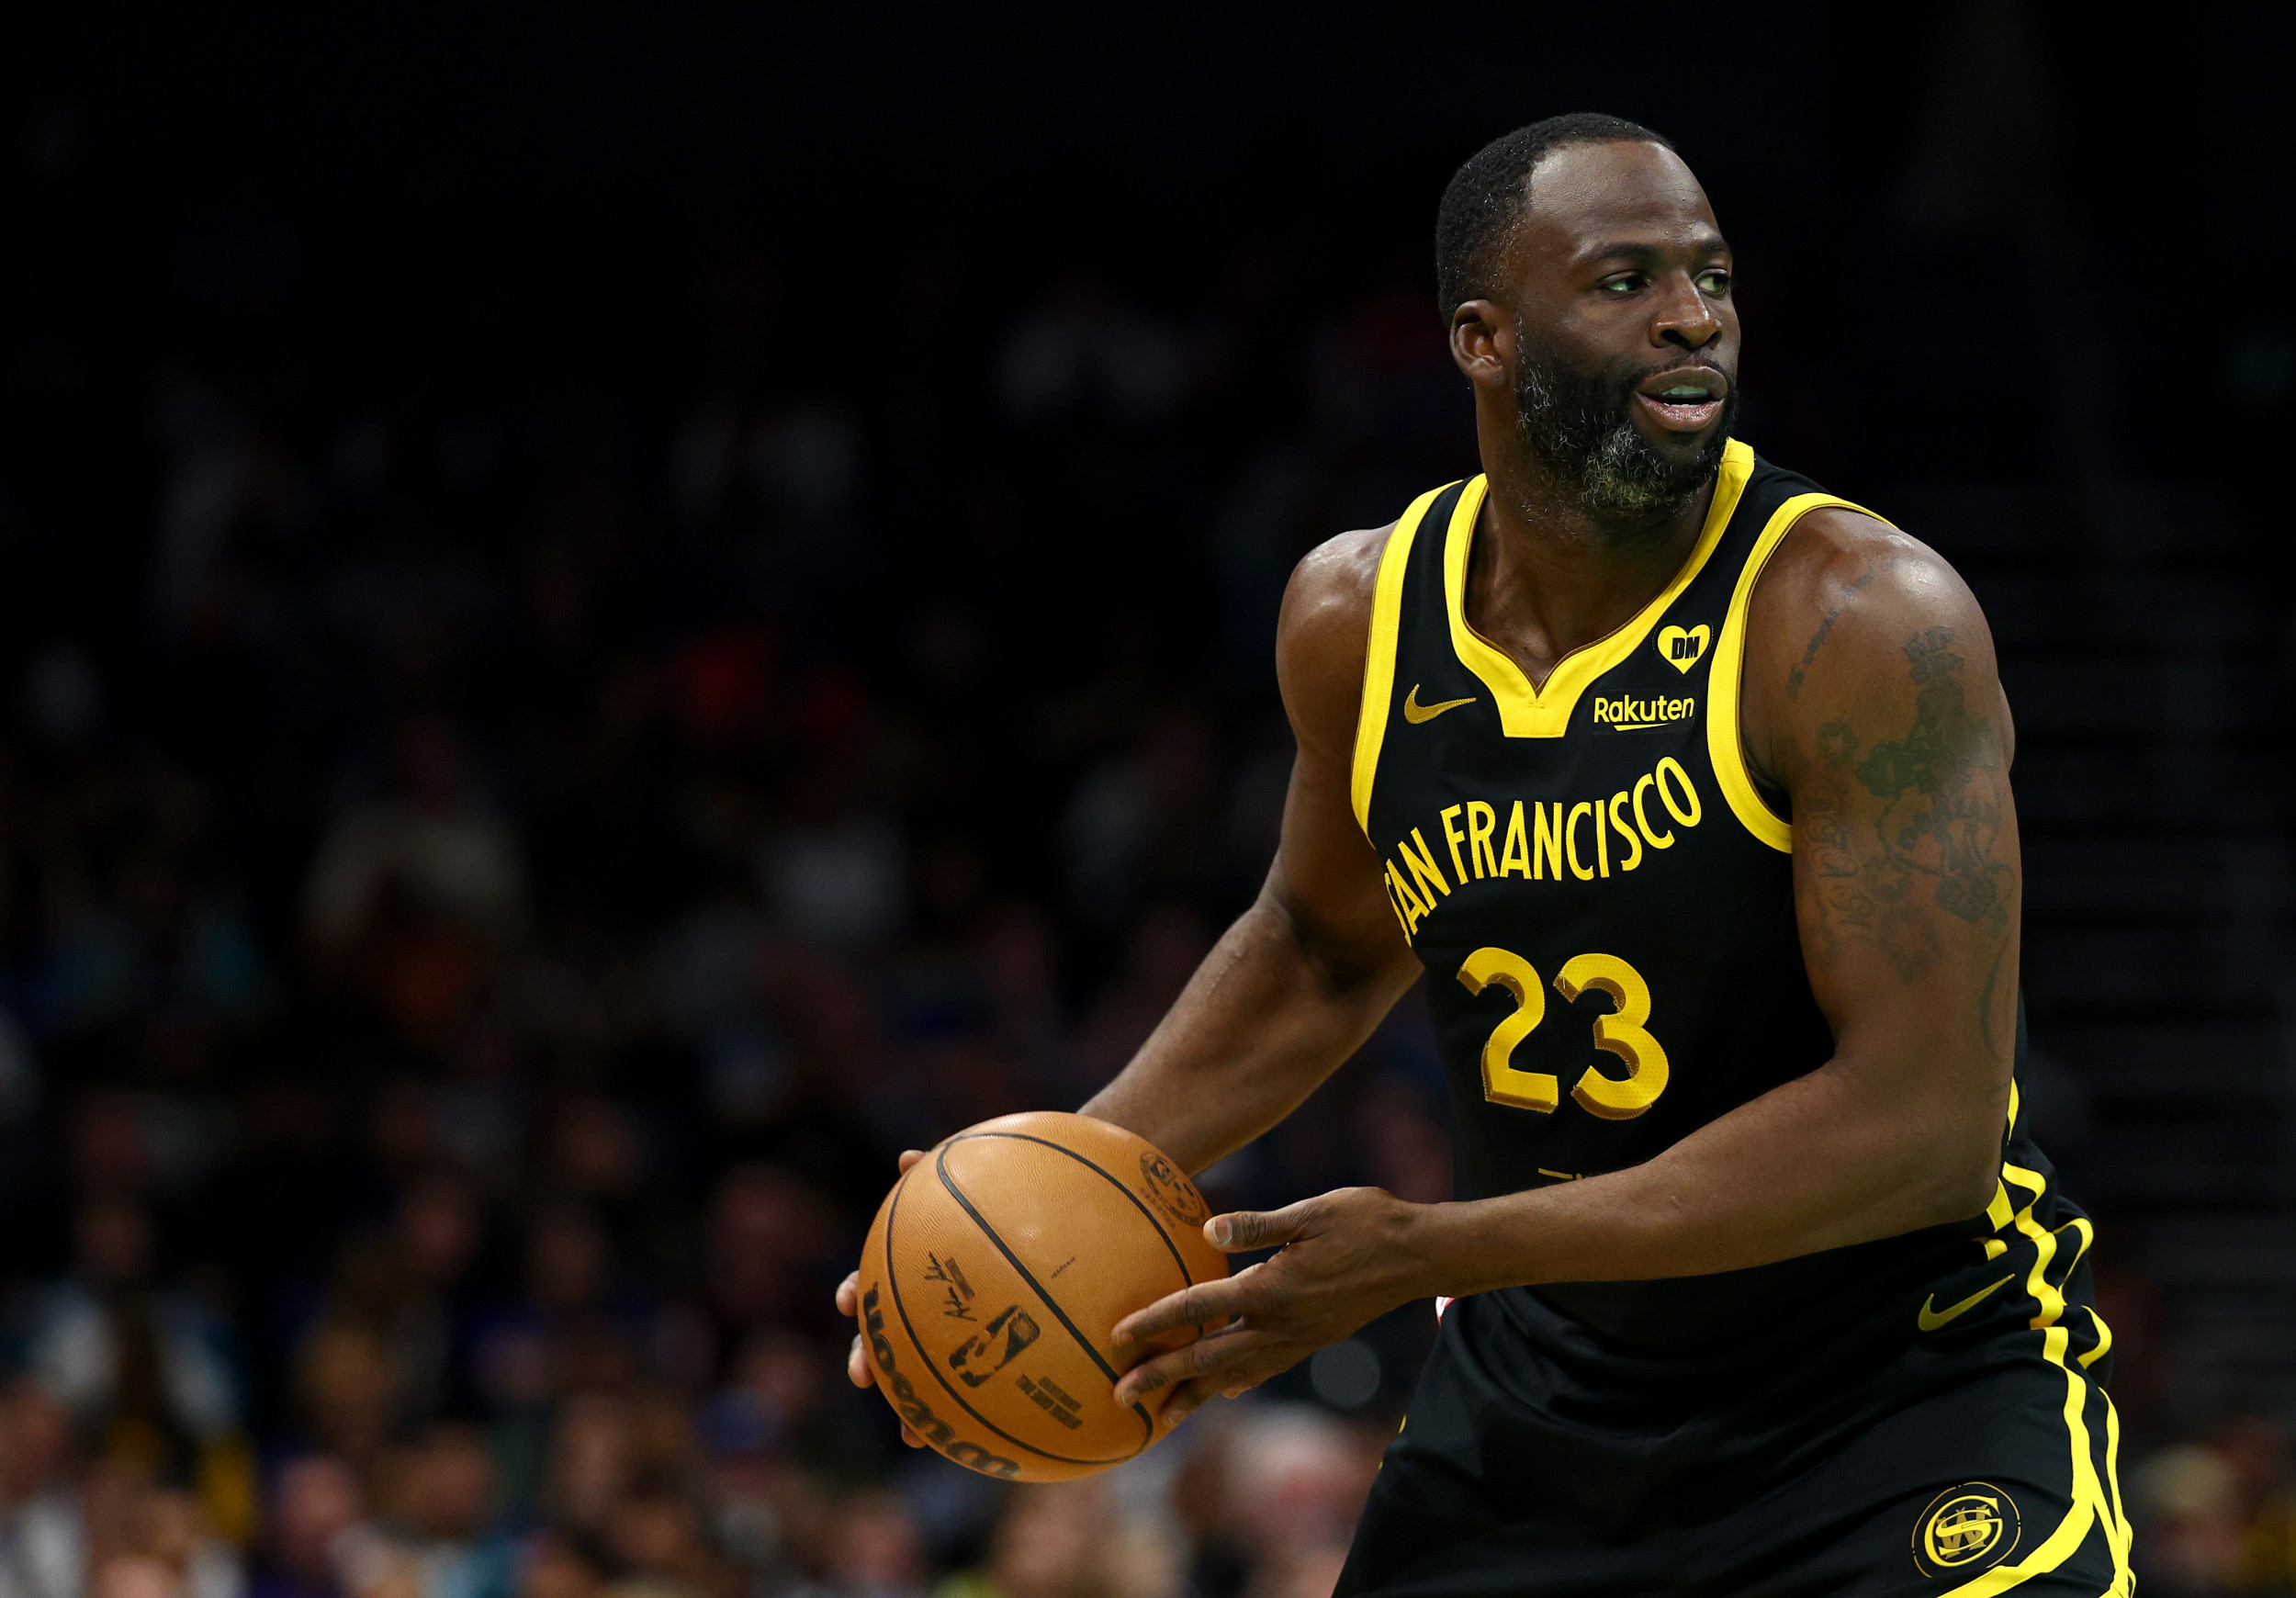 Draymond Green selects an interesting current NBA player he would like to work with